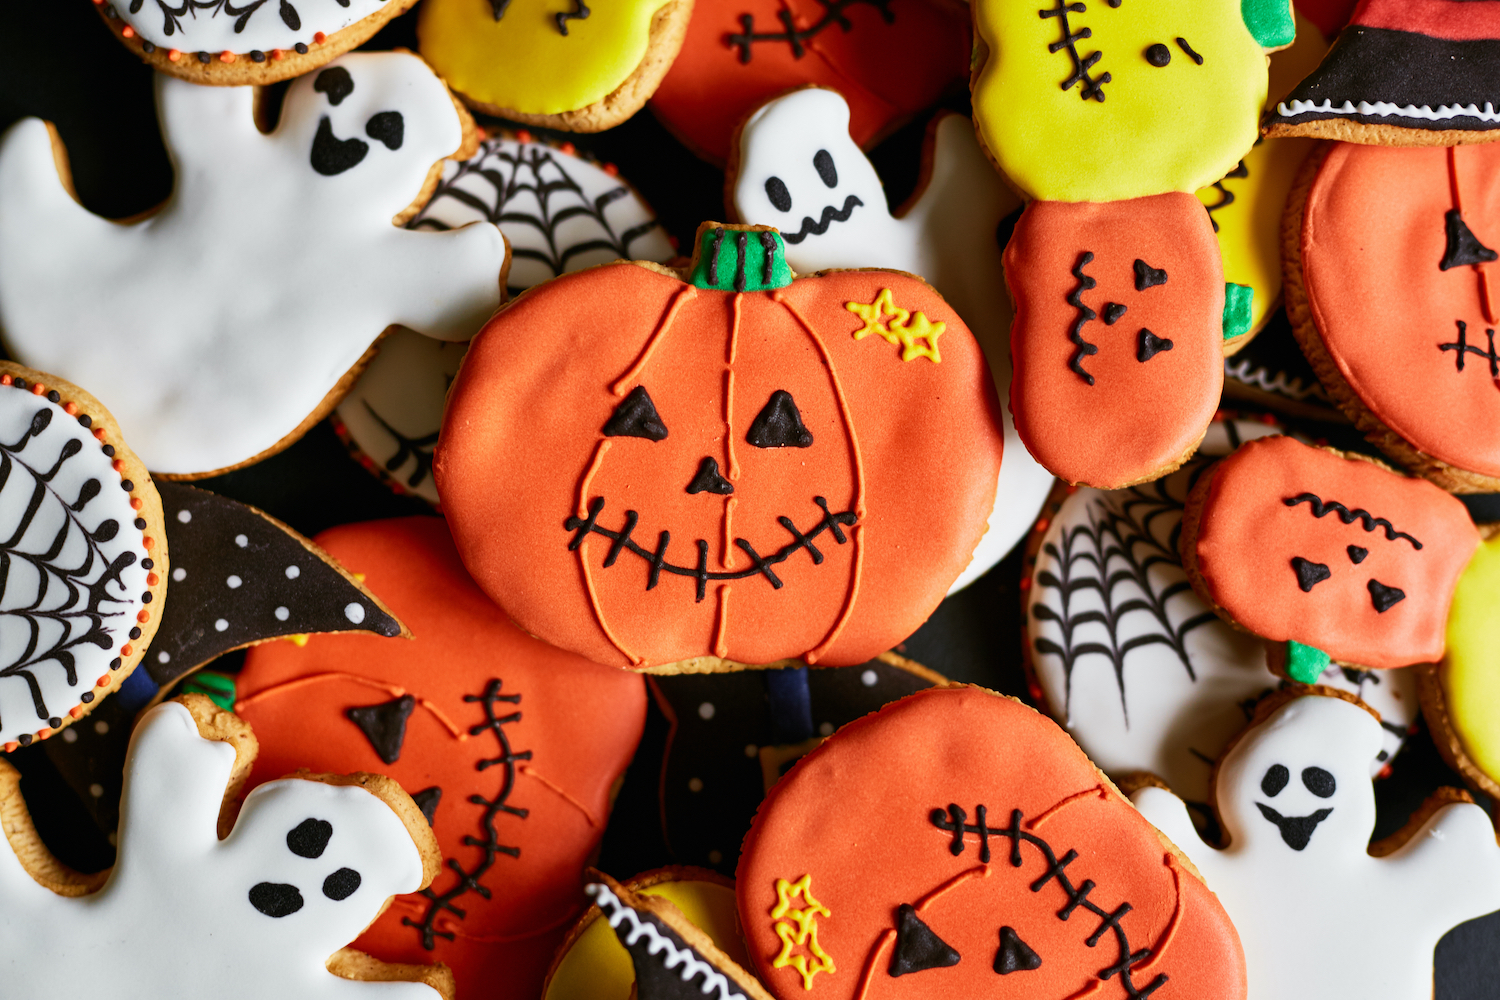 Traditionally decorated halloween cookies